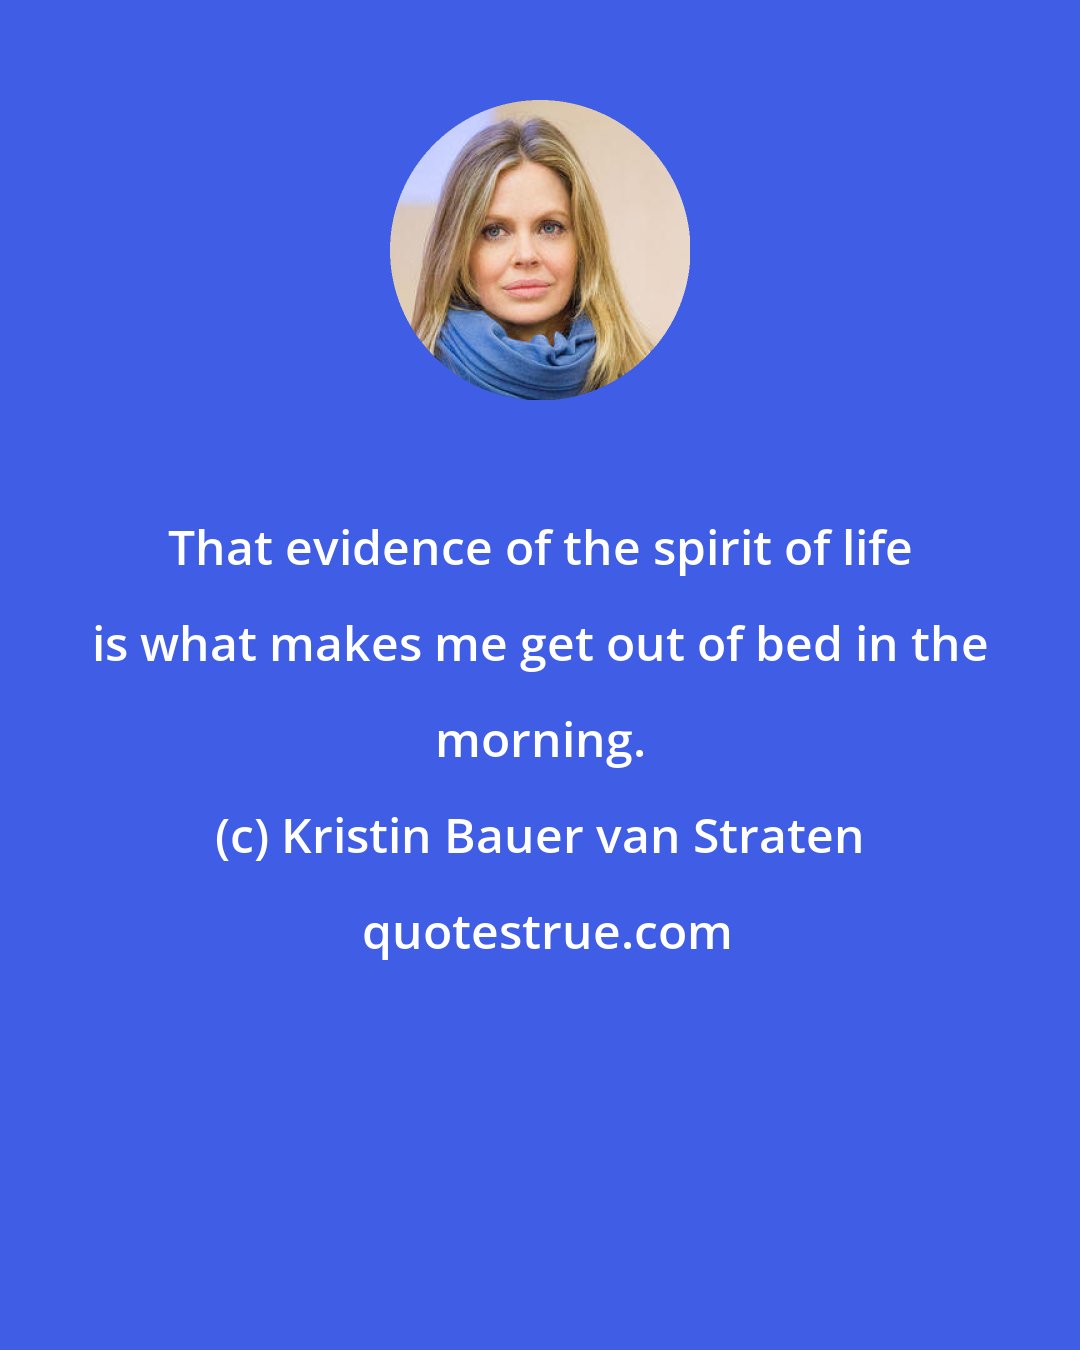 Kristin Bauer van Straten: That evidence of the spirit of life is what makes me get out of bed in the morning.